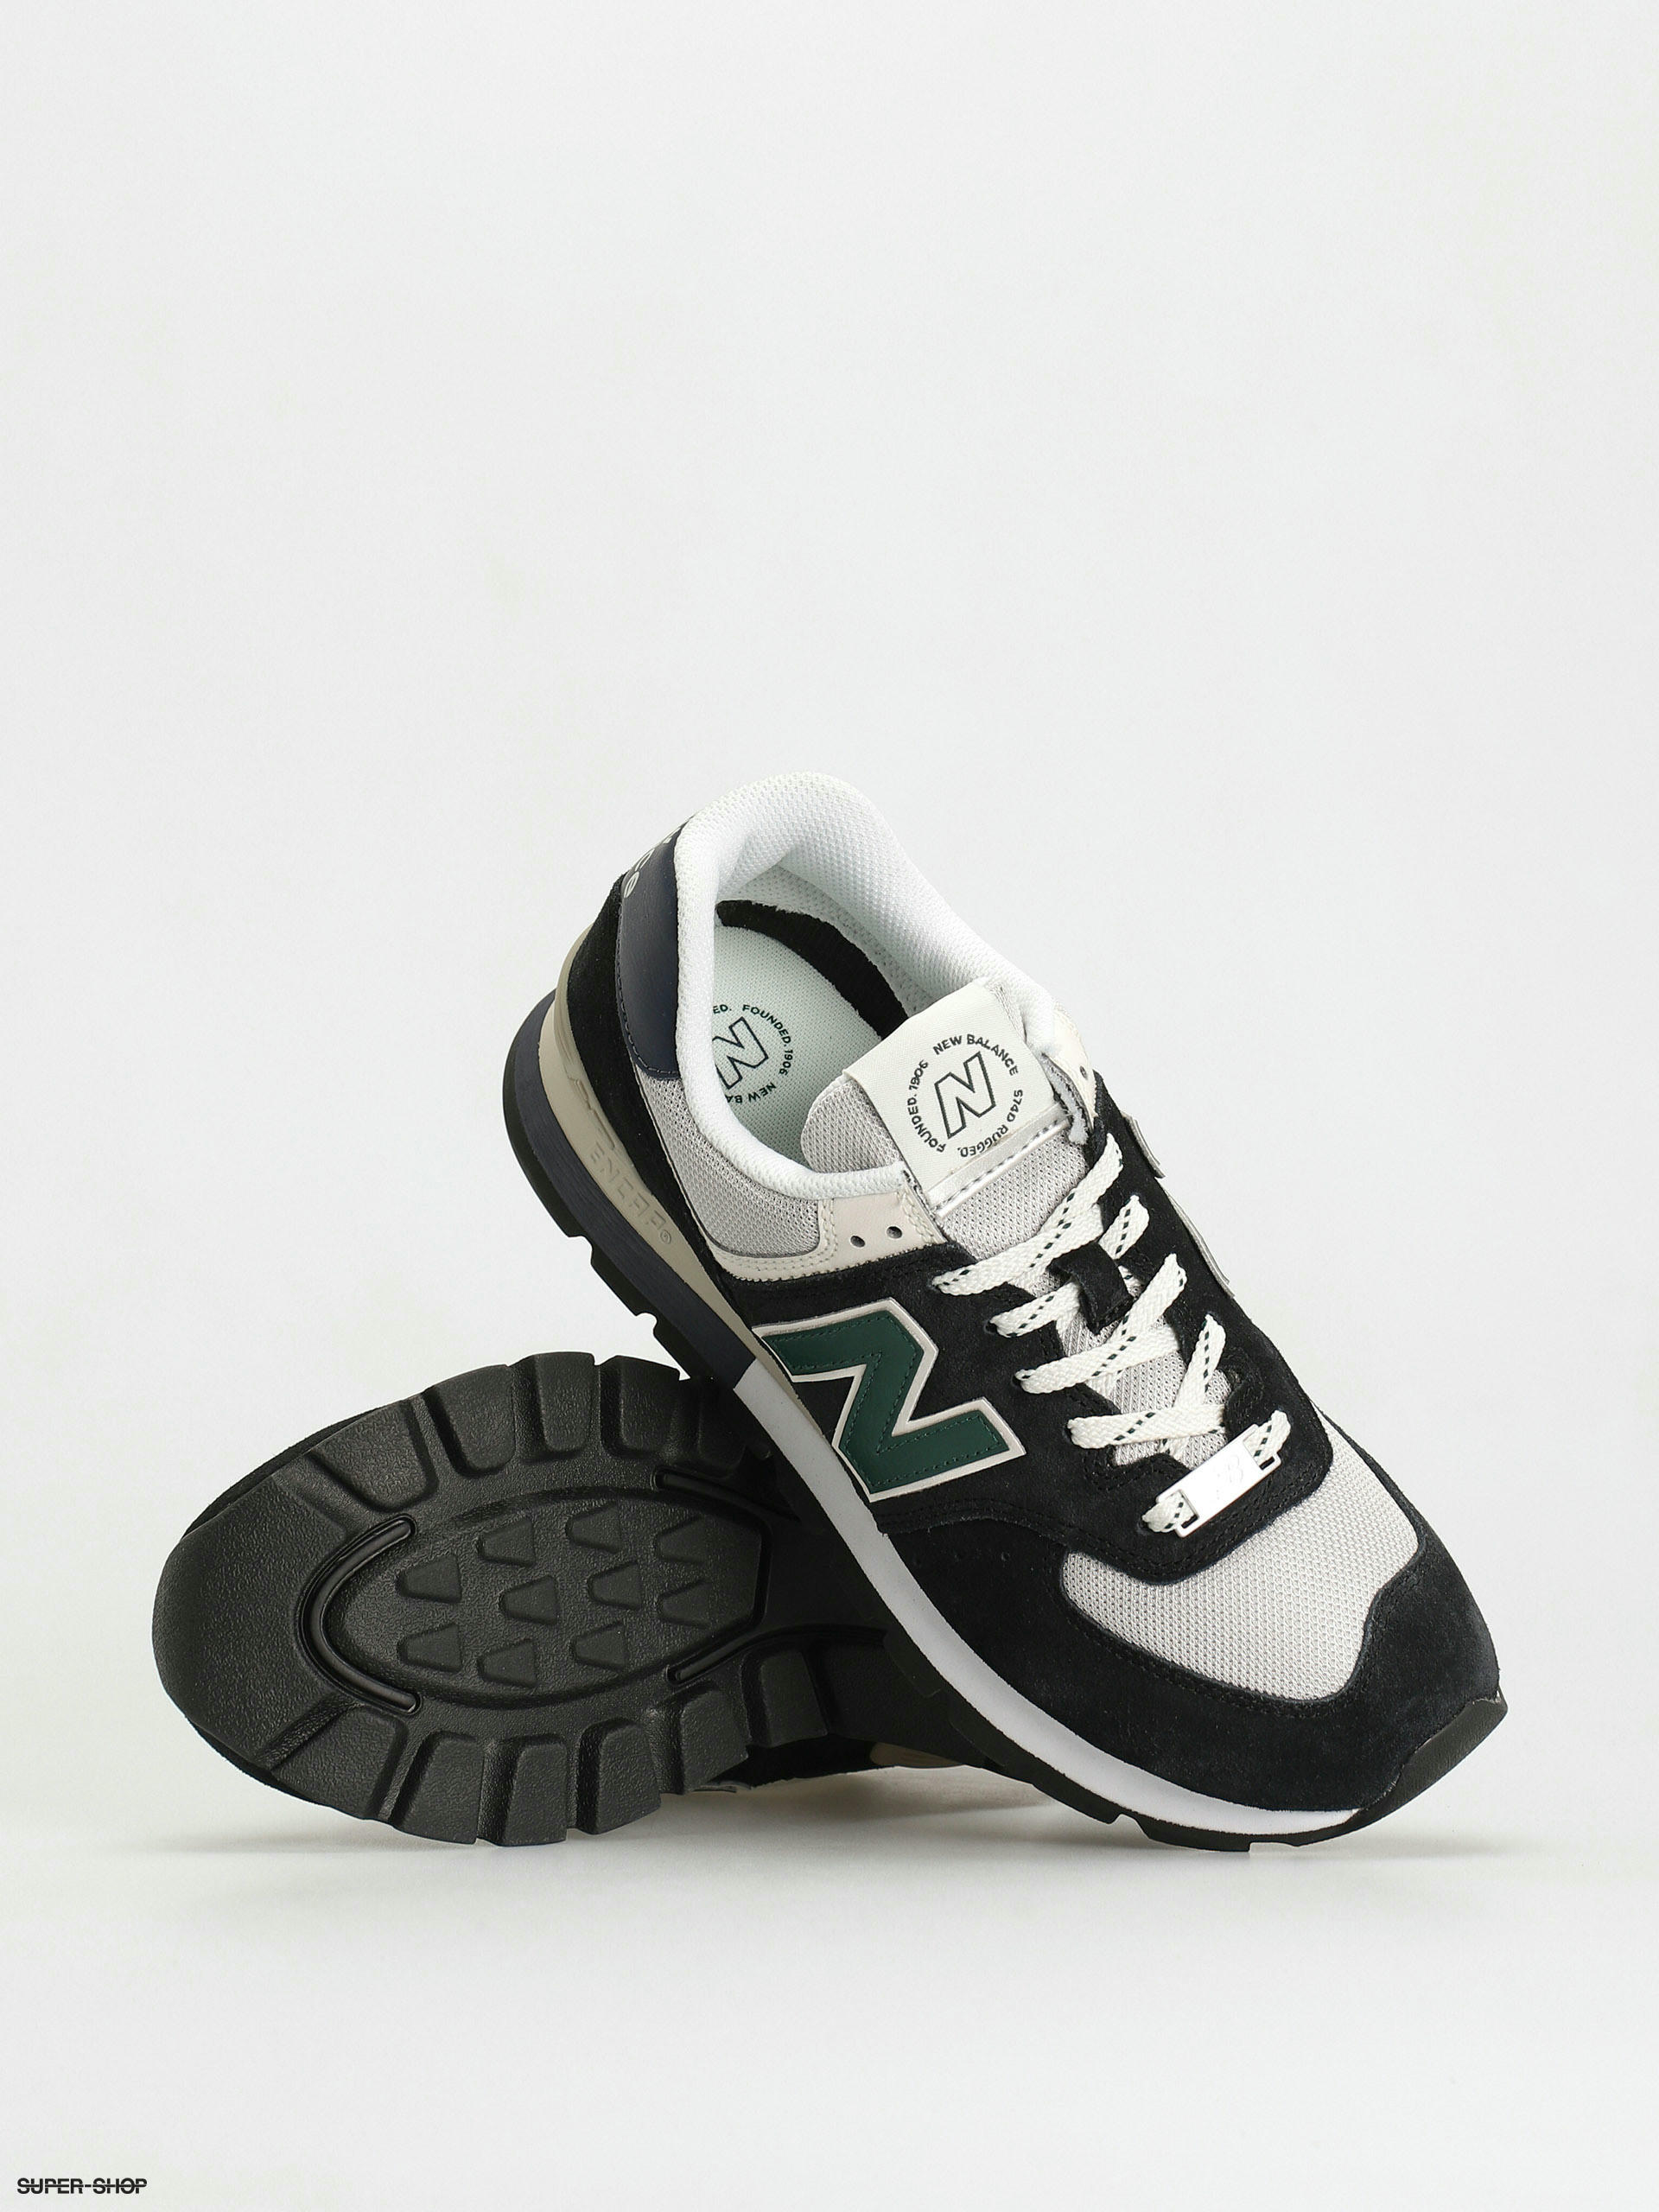 New Balance Formateurs 574 Made in USA 'White Navy' - New Balance 990v6  Surfaces in Grey and Navy | M992EC - RvceShops